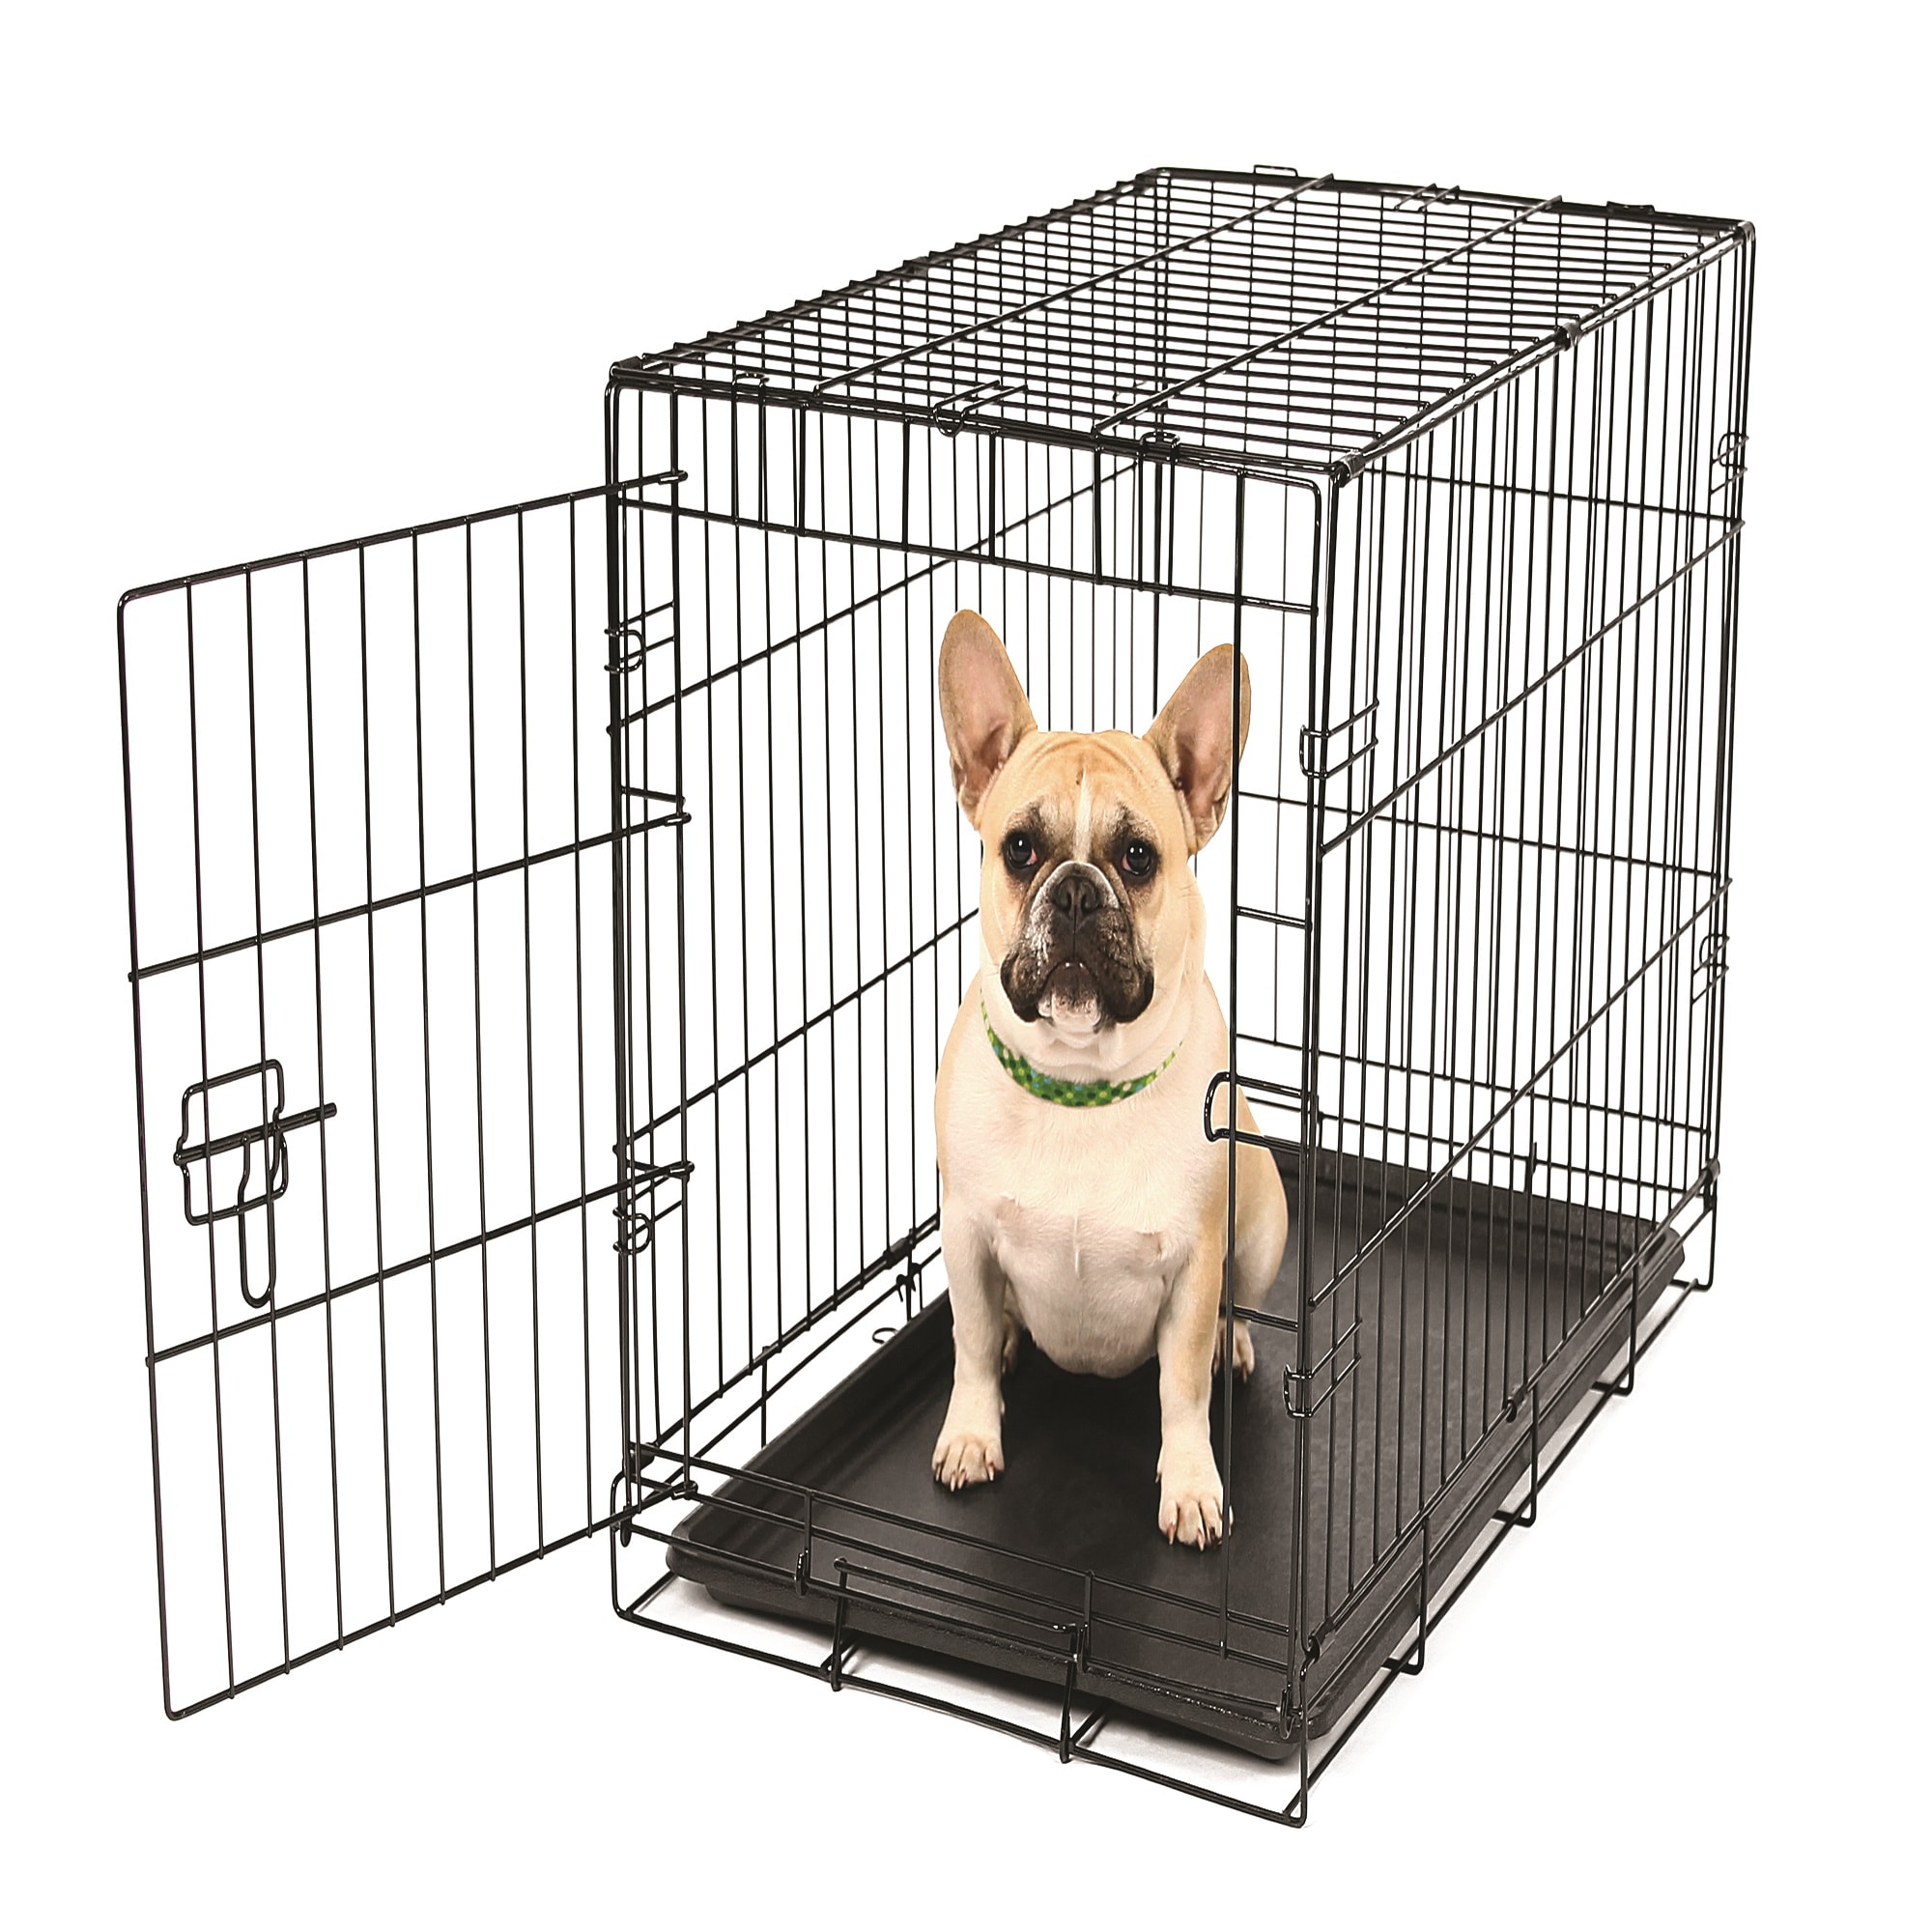 Carlson Pet Products Secure and Foldable Single Door Metal Dog Crate 